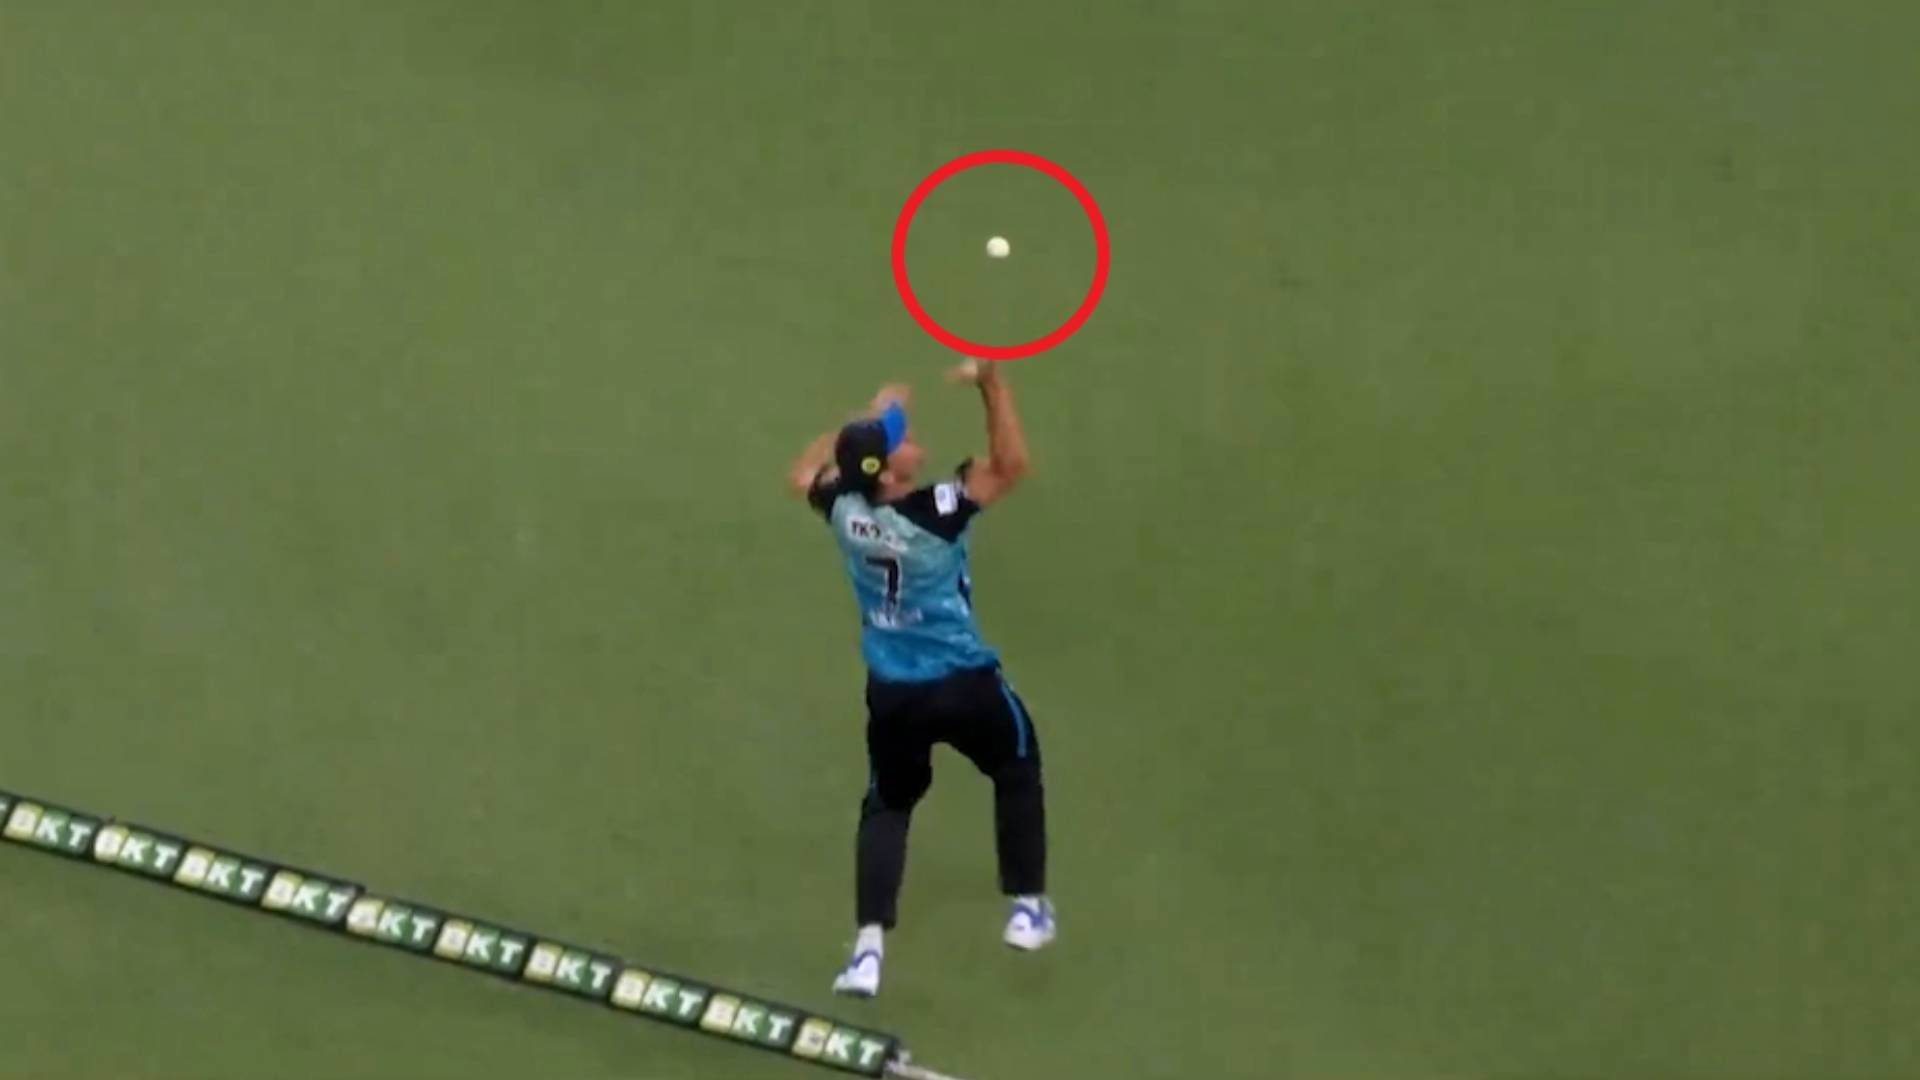 'Absolute beauty': Adelaide Strikers advance in BBL finals after insane James Bazley catch